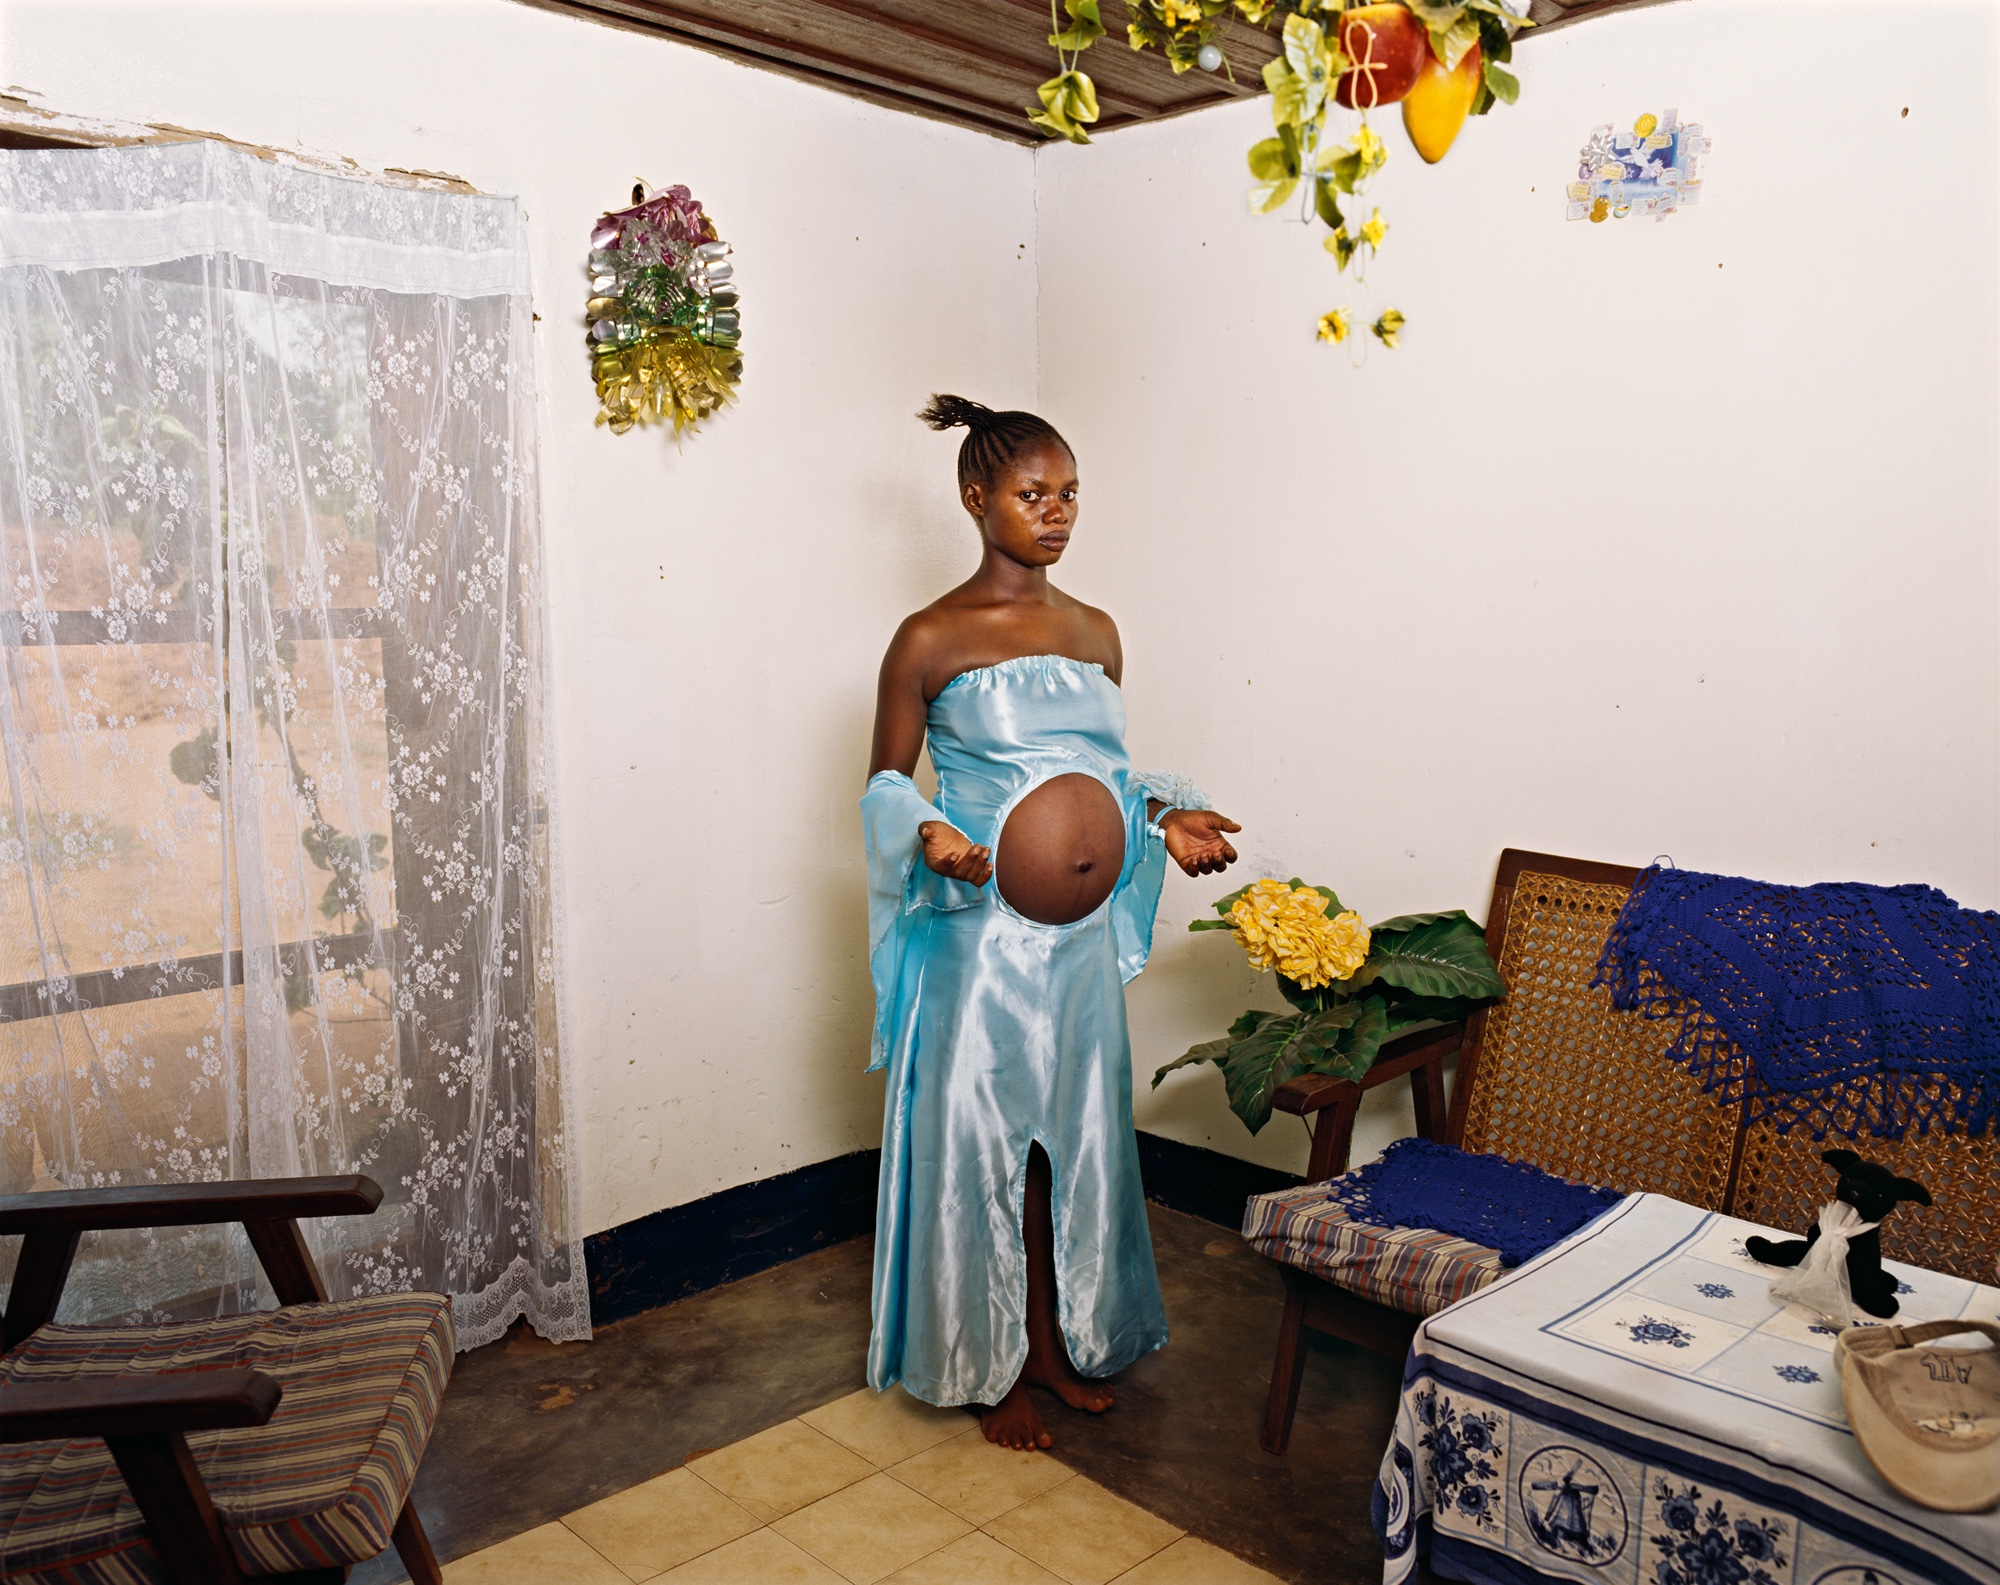 Deana Lawson’s mythical portraits of the black experience